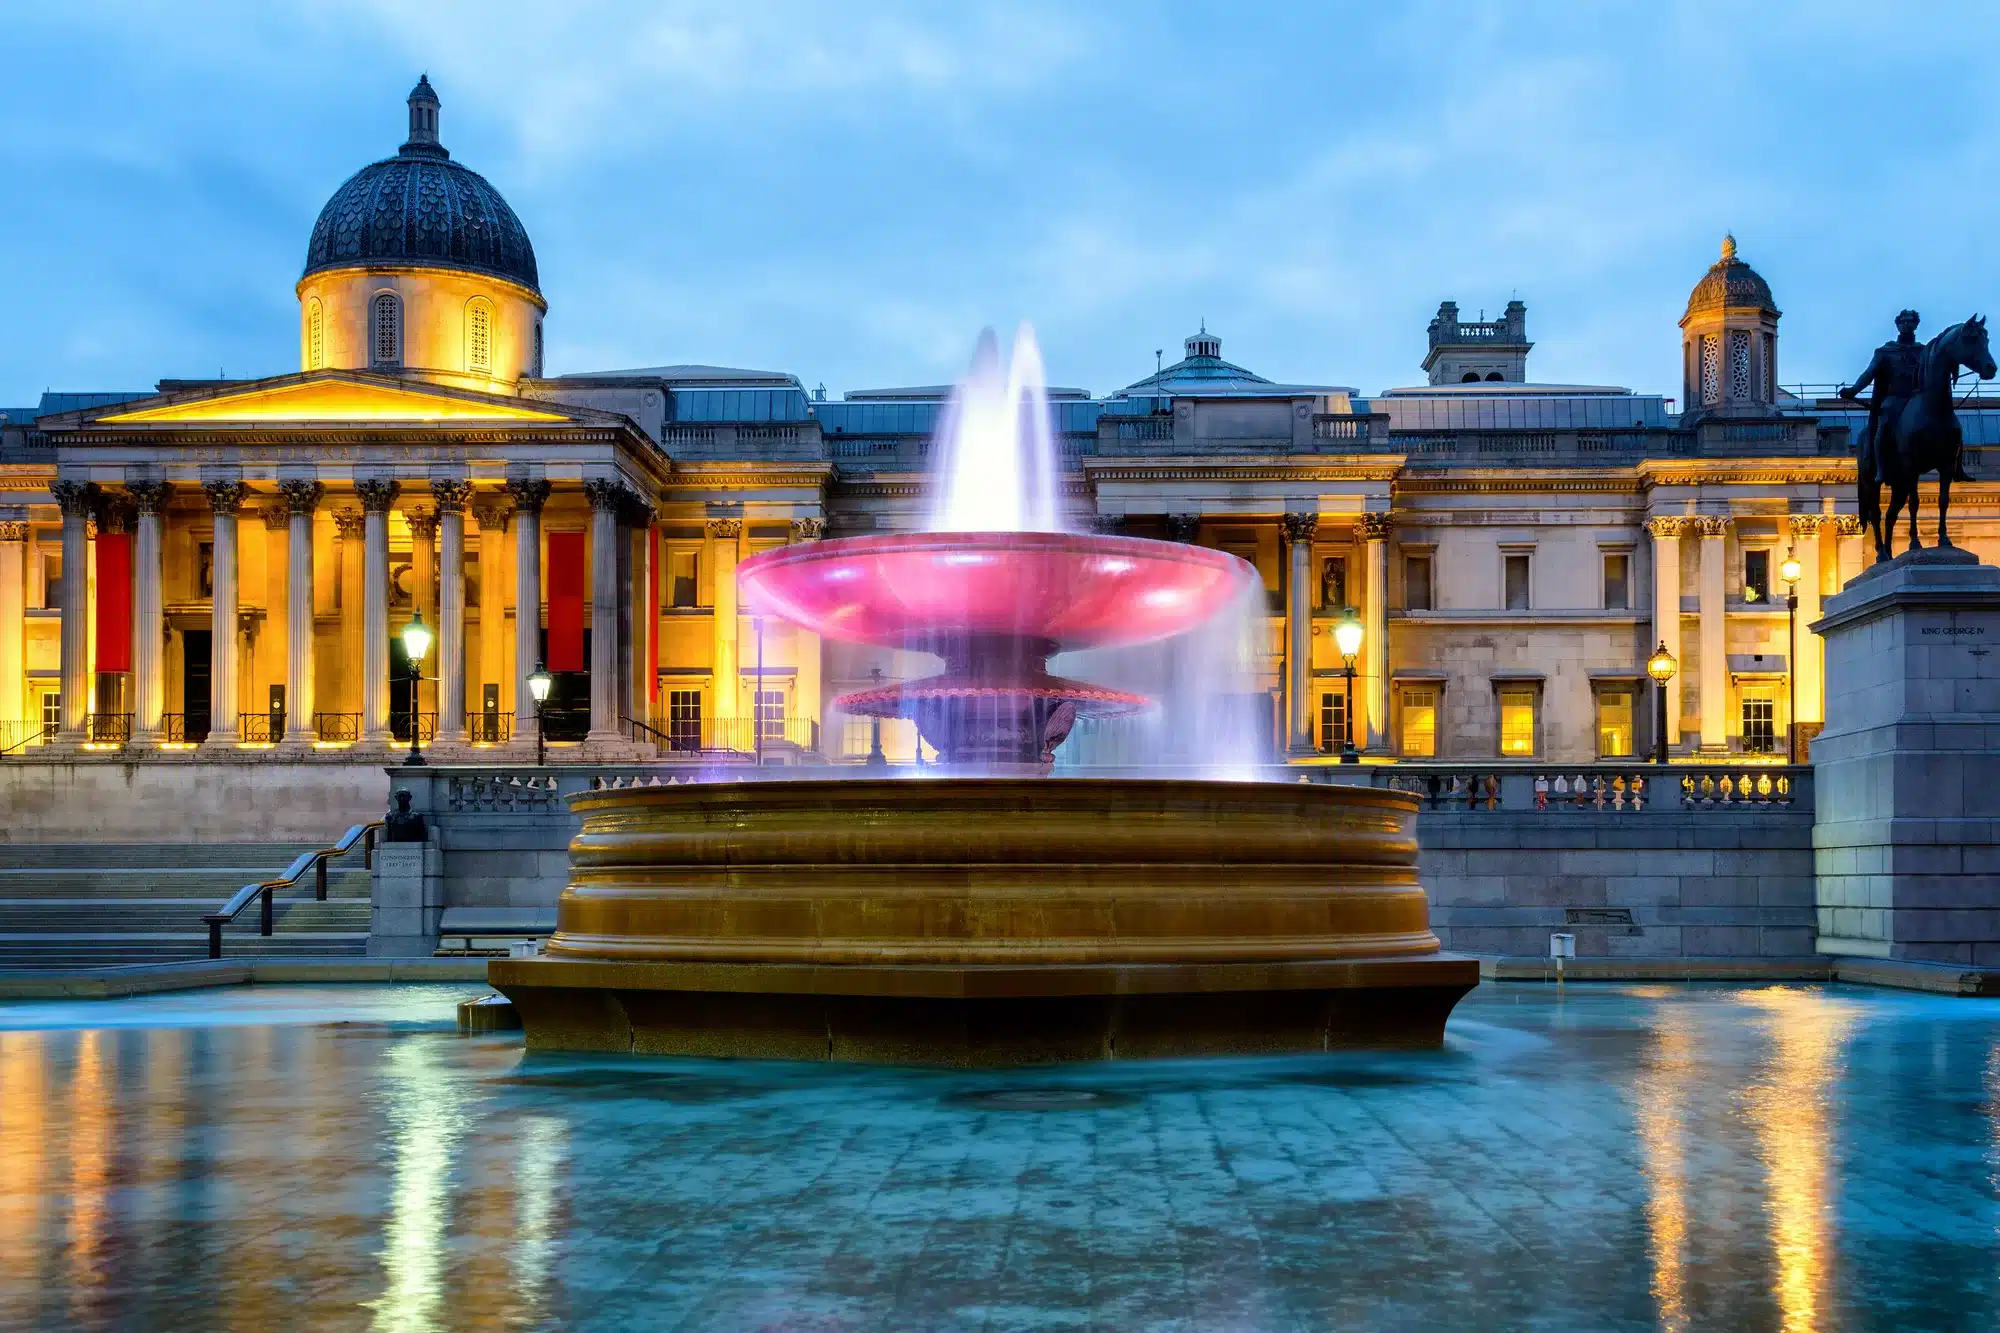 National Gallery and Trafalgar square in London, England, UK